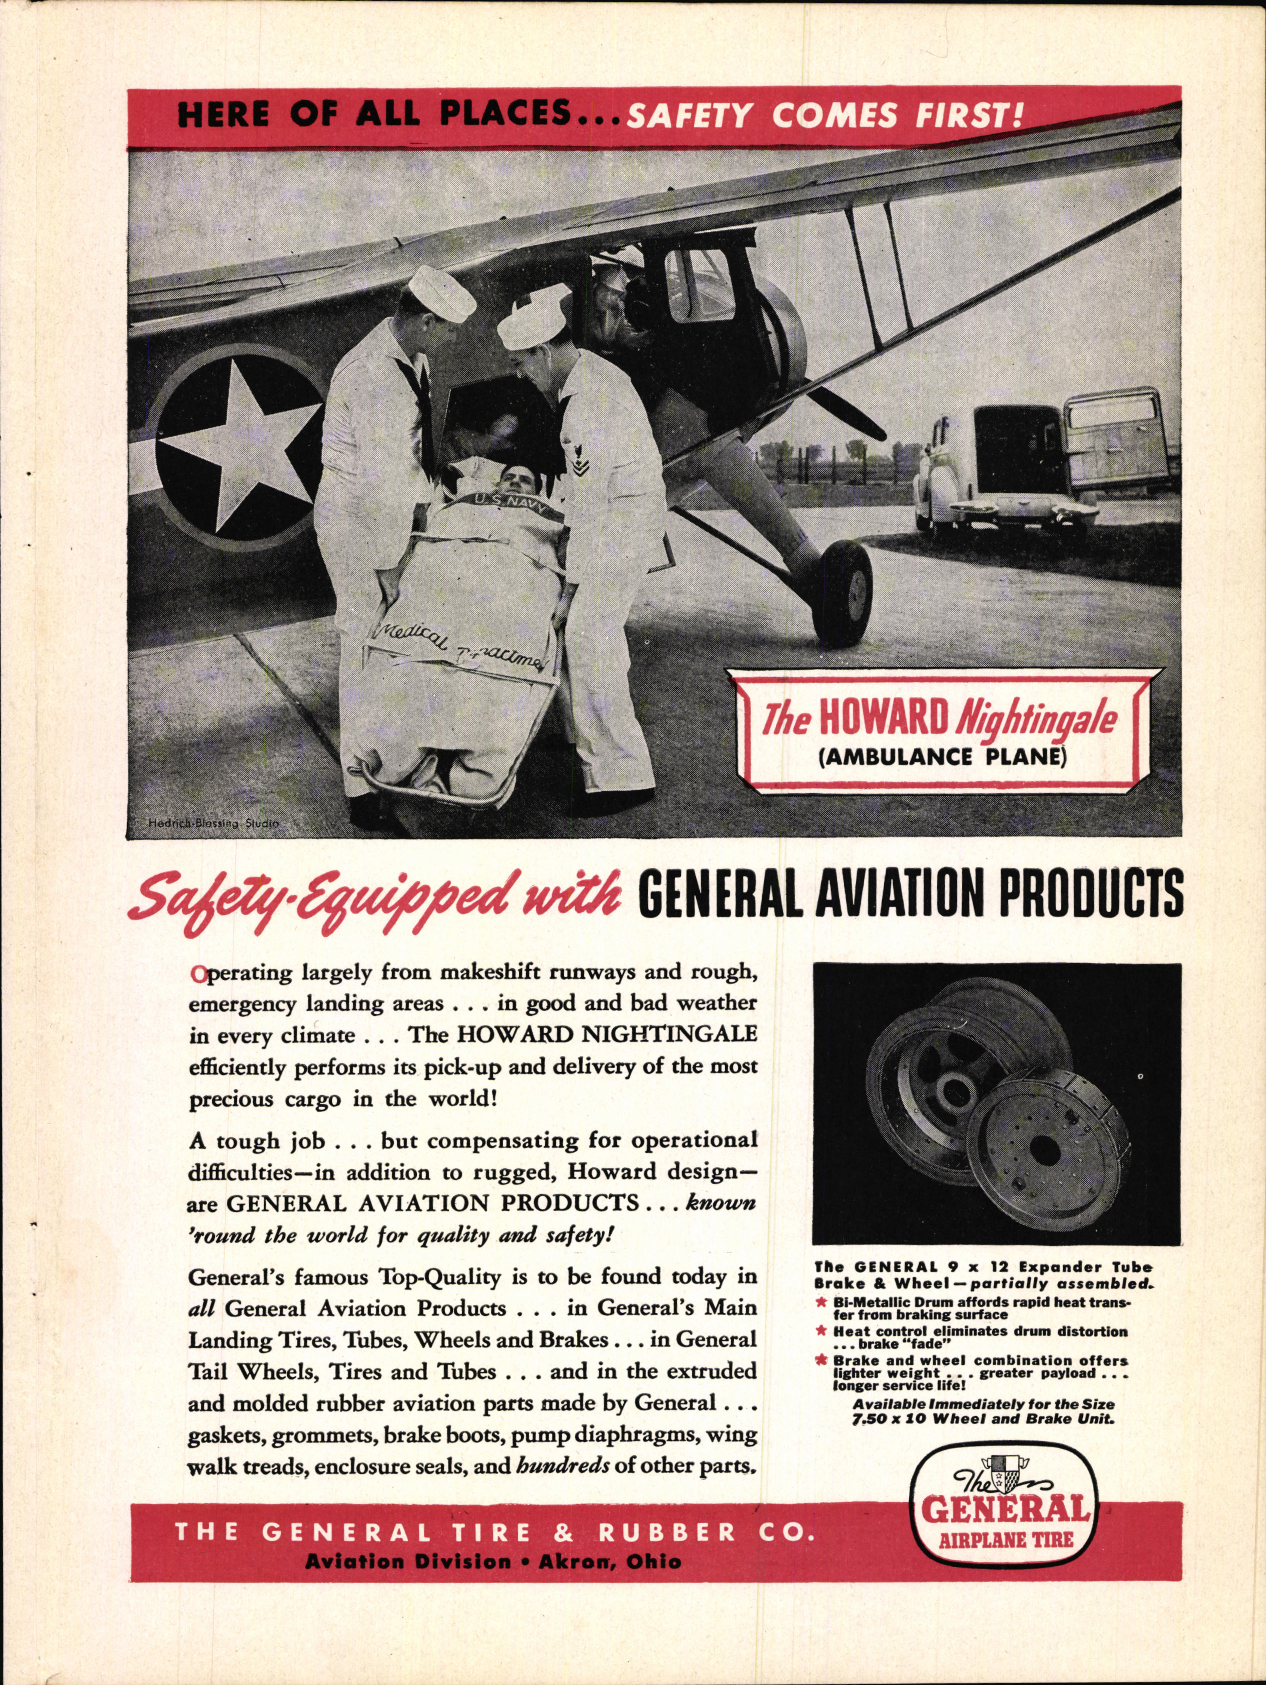 Sample page 7 from AirCorps Library document: American Aviation Magazine - Volume 7 - No. 16